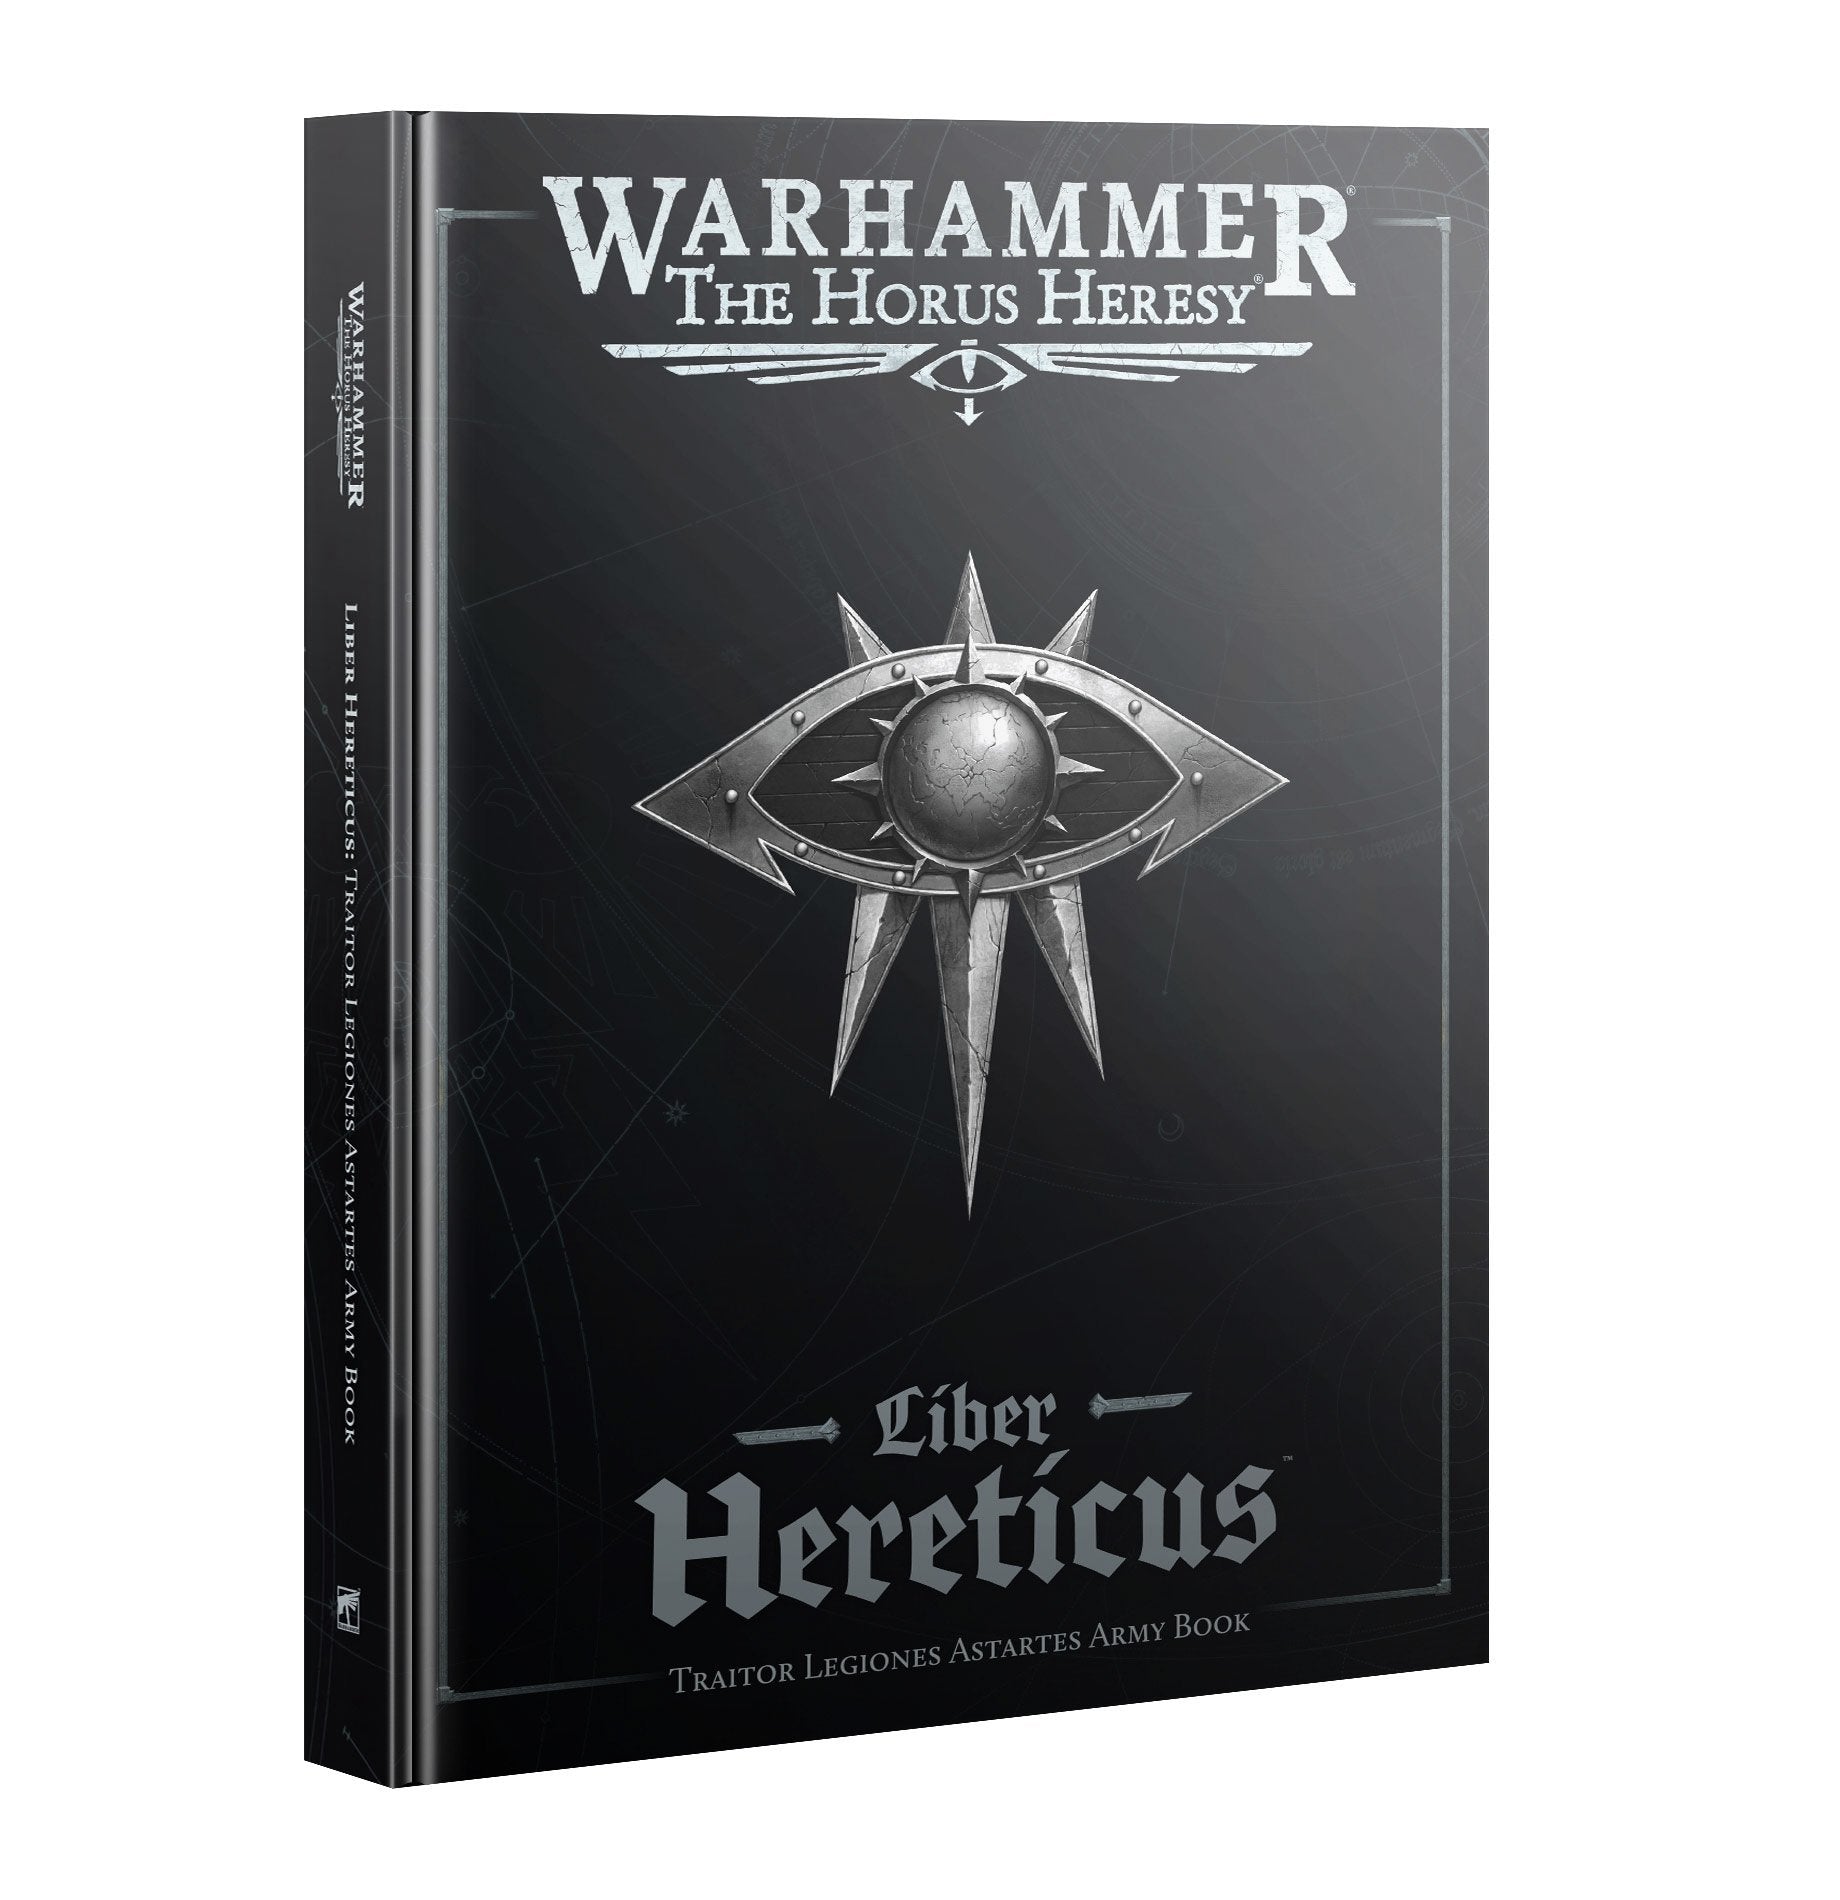 Liber Hereticus – Traitor Legiones Astartes Army Book | Jack's On Queen